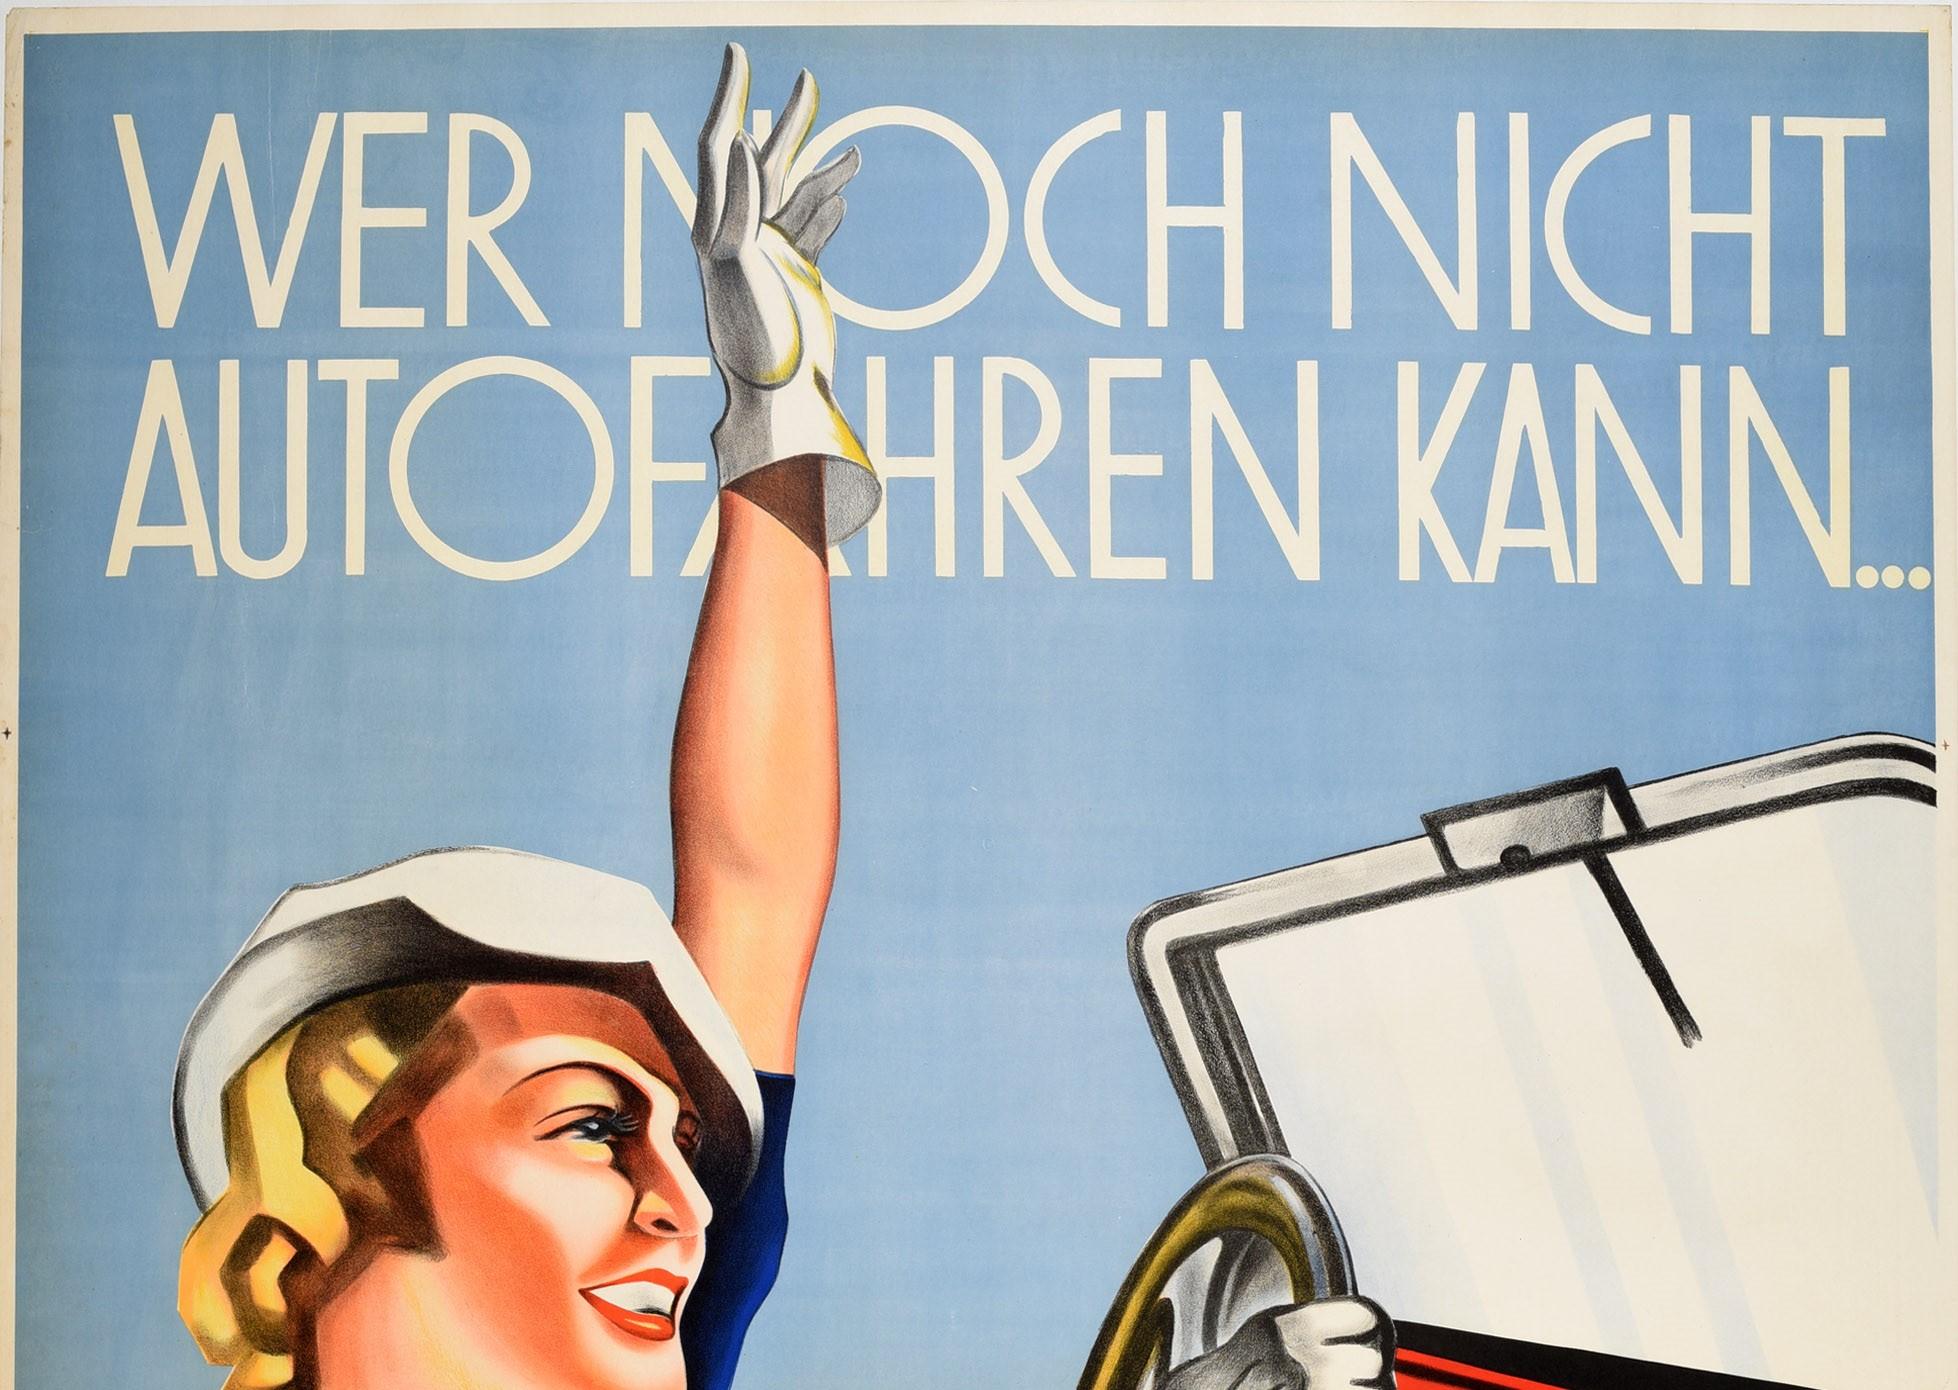 Original vintage advertising poster for the Lattermann Driving School featuring a great Art Deco style illustration of a smiling blonde lady wearing white driving gloves and a white hat sitting in an open top car with one hand on the steering wheel